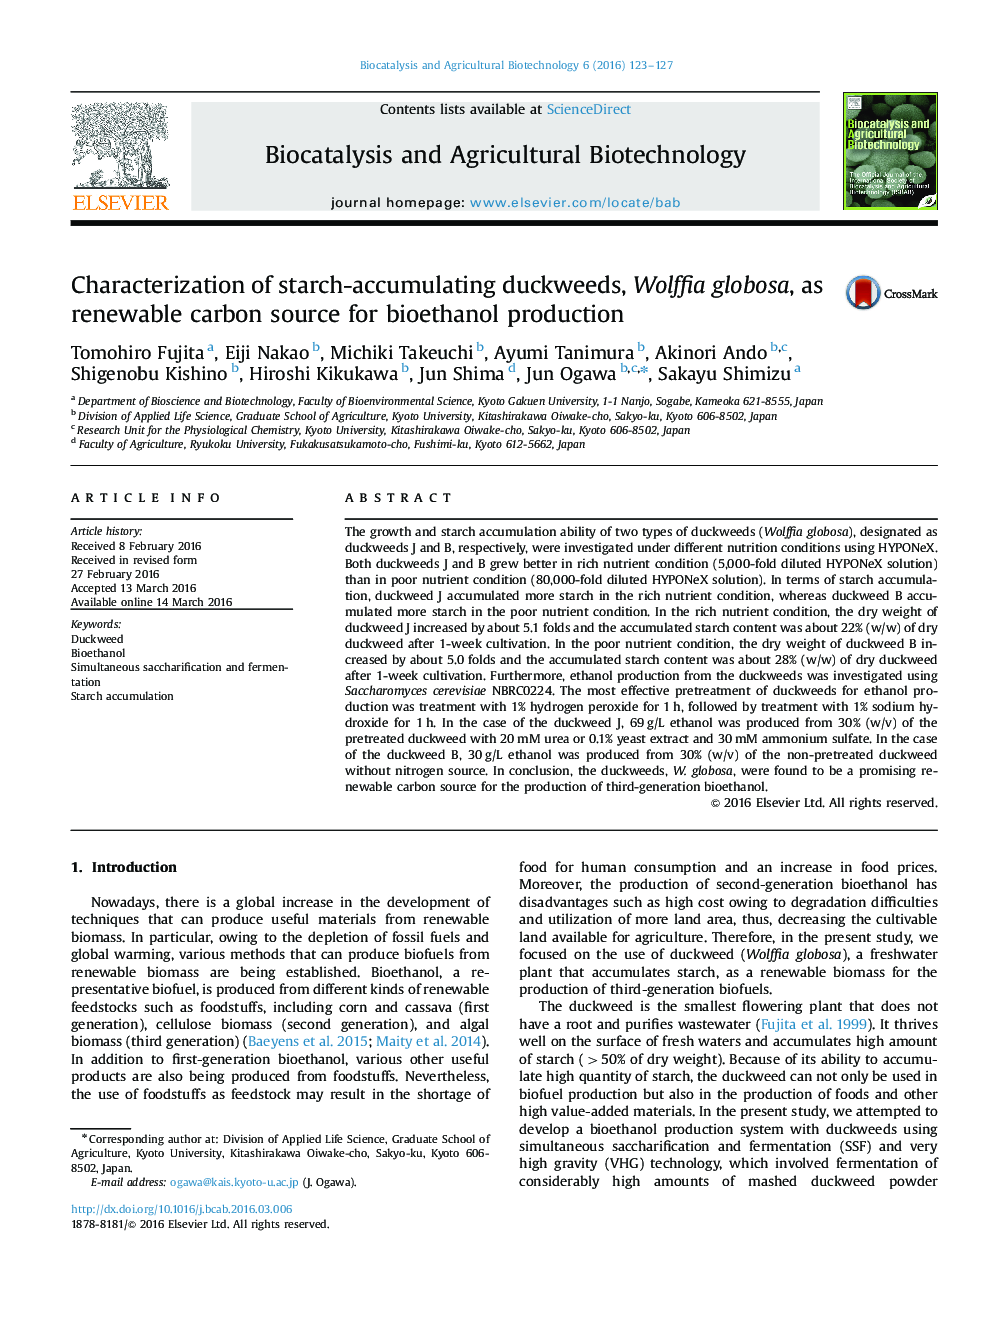 Characterization of starch-accumulating duckweeds, Wolffia globosa, as renewable carbon source for bioethanol production